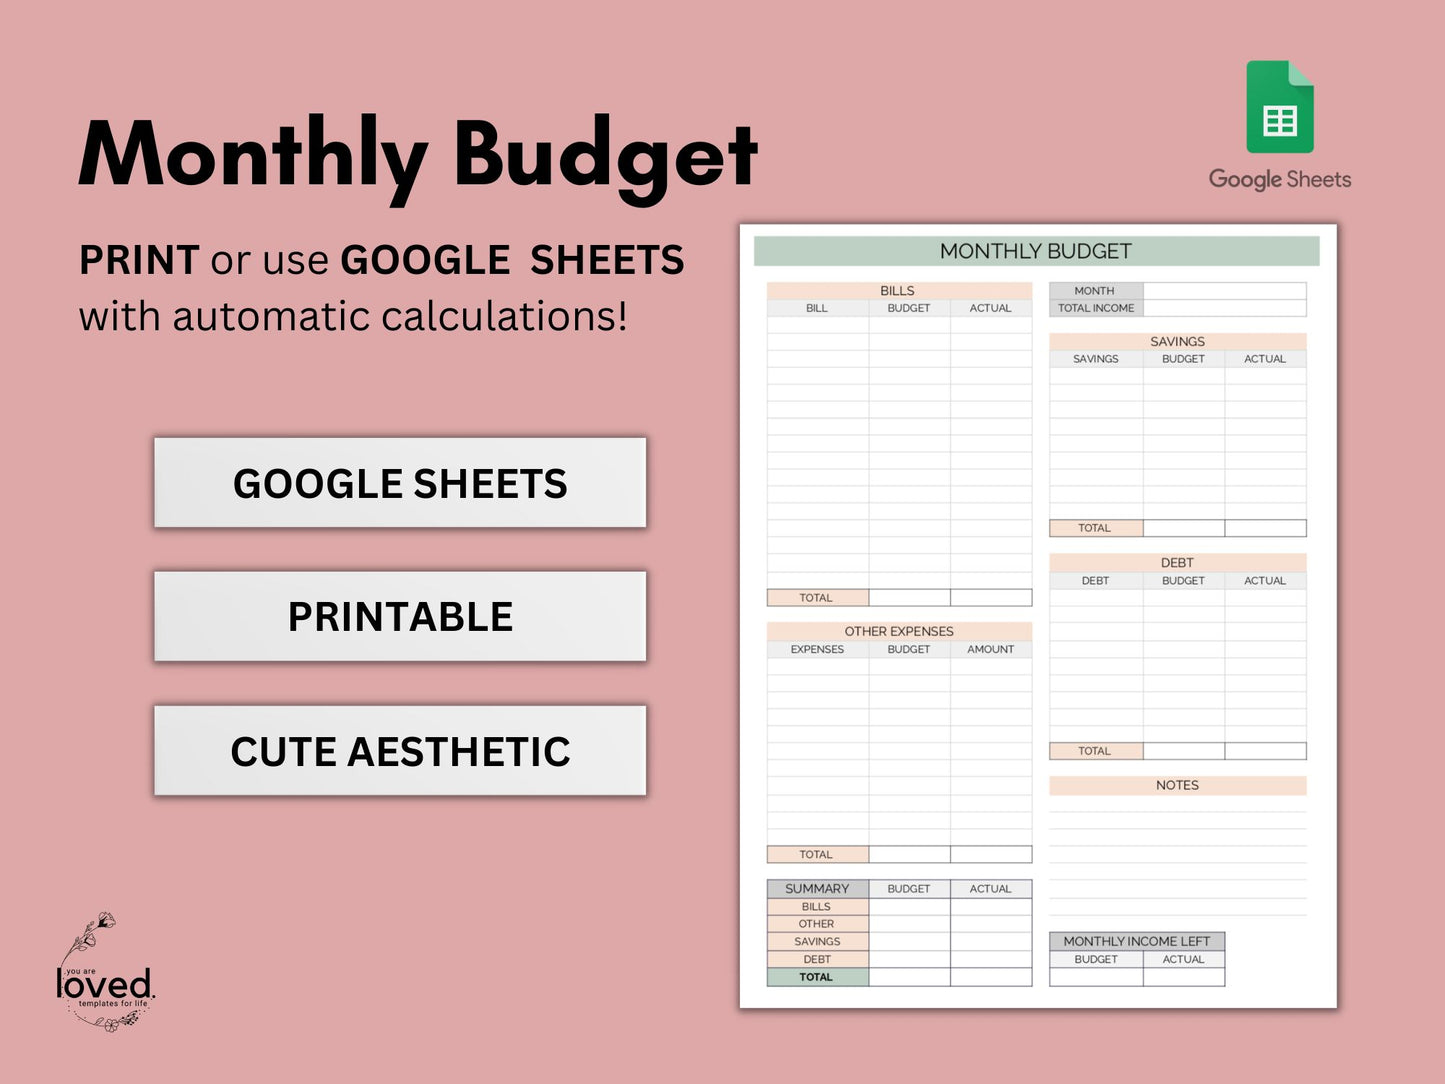 Monthly Budget Template | GOOGLE SHEETS